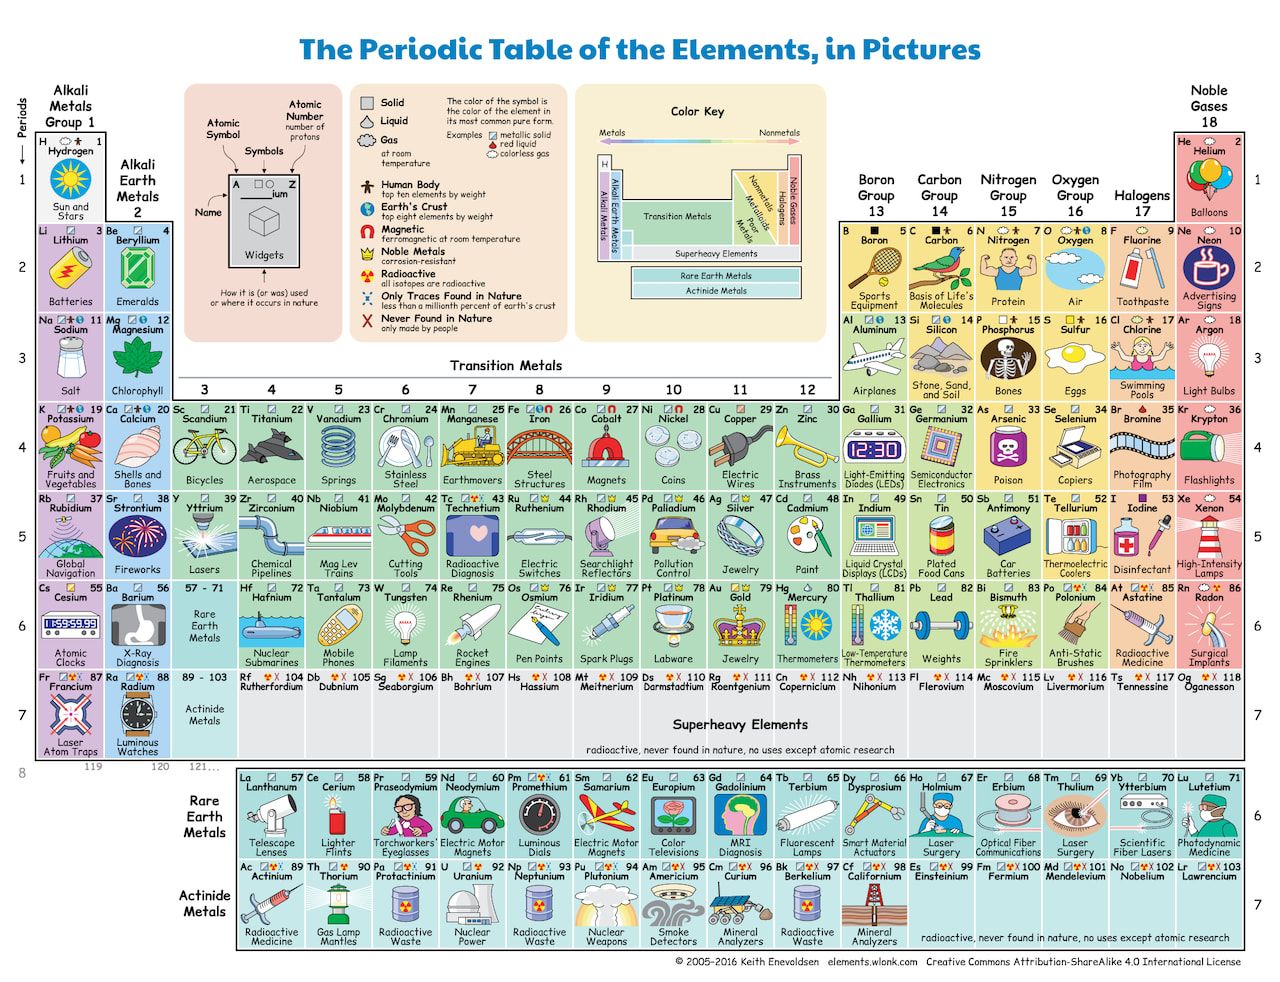 An Illustrated Periodic Table of the Elements